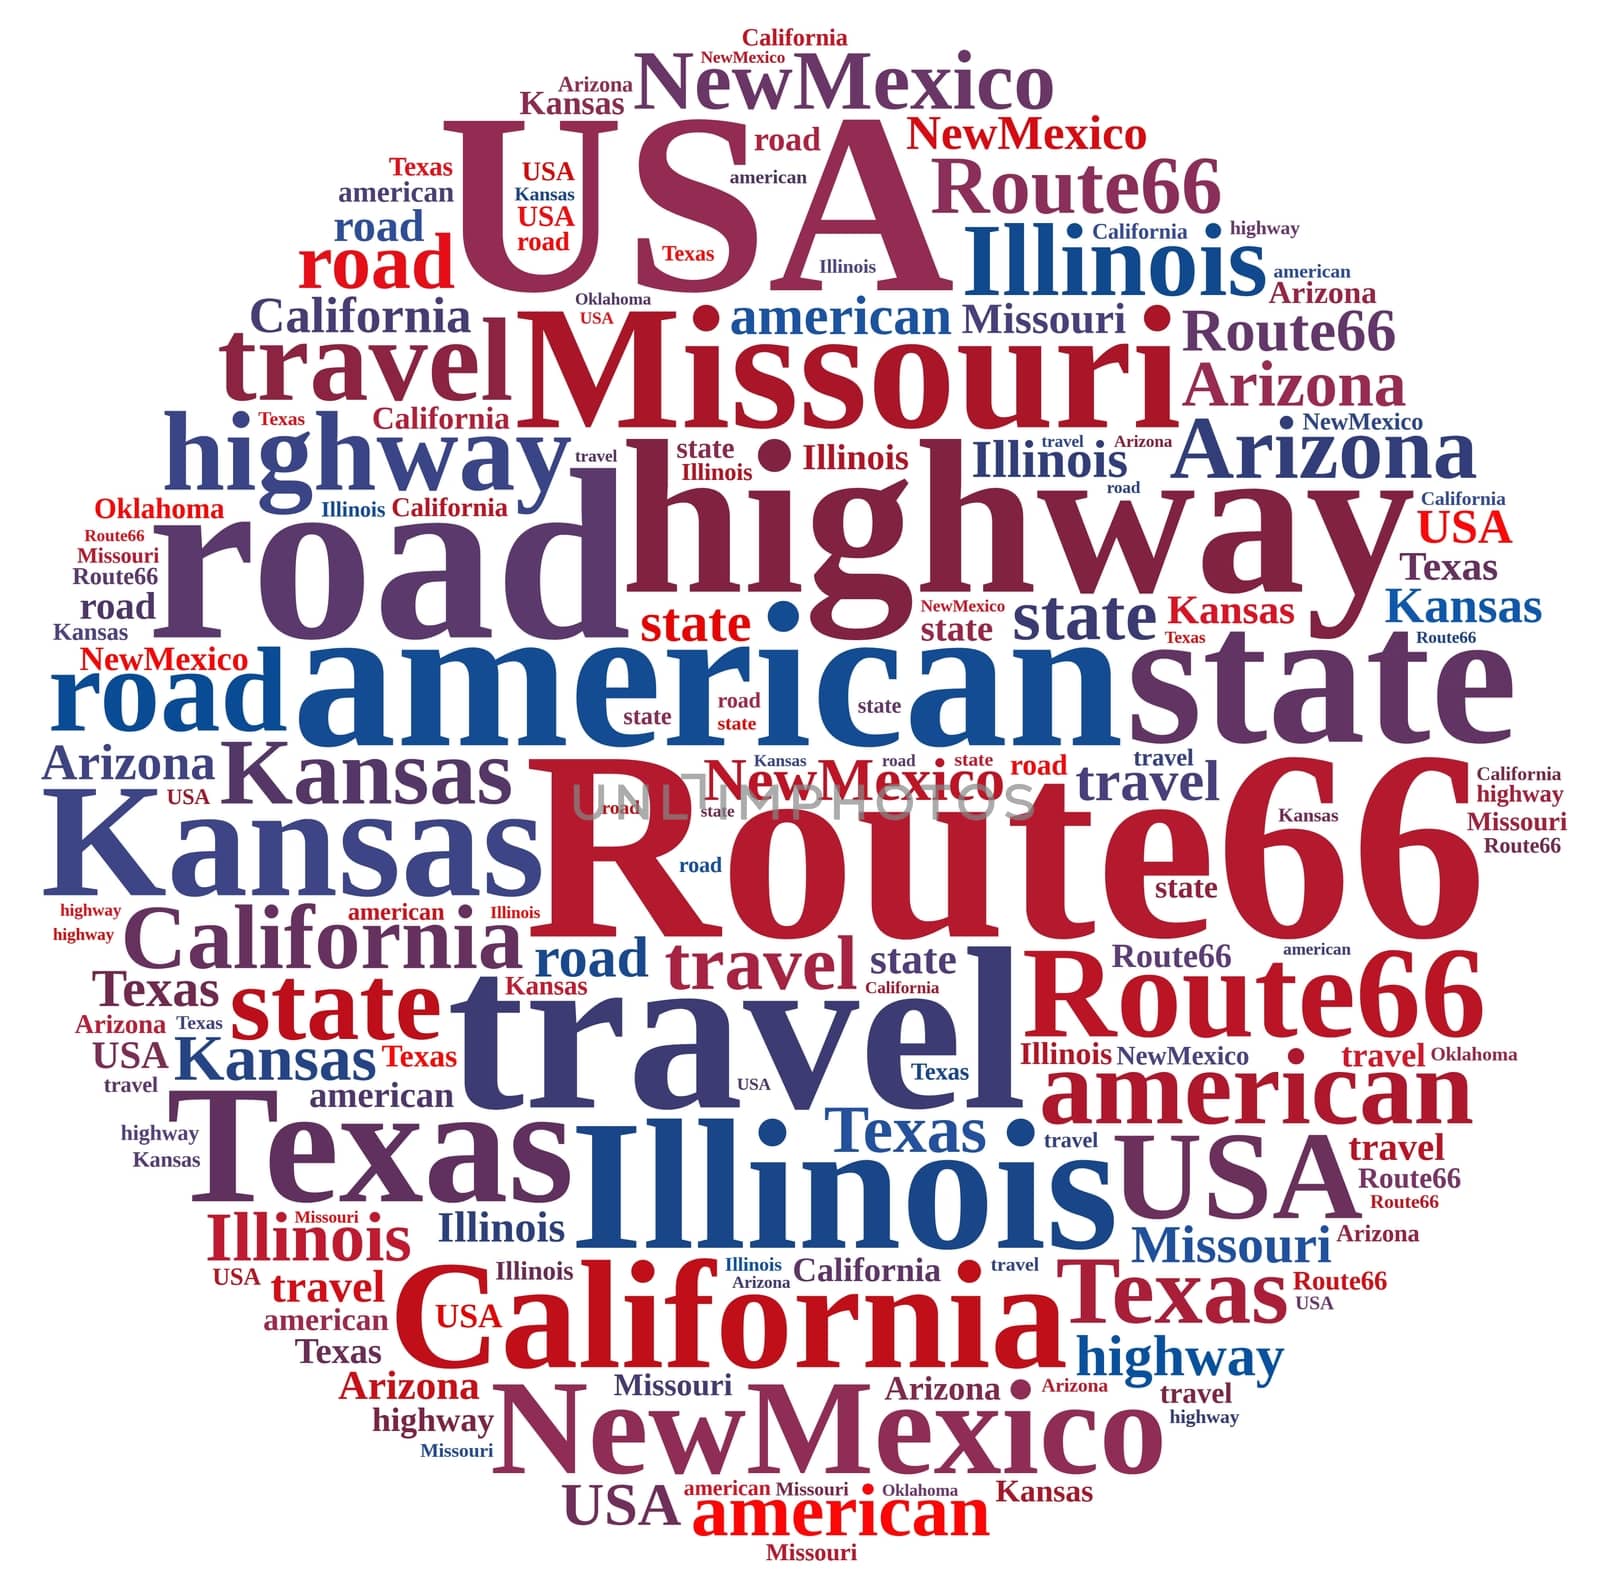 Illustration with word cloud on Route 66.